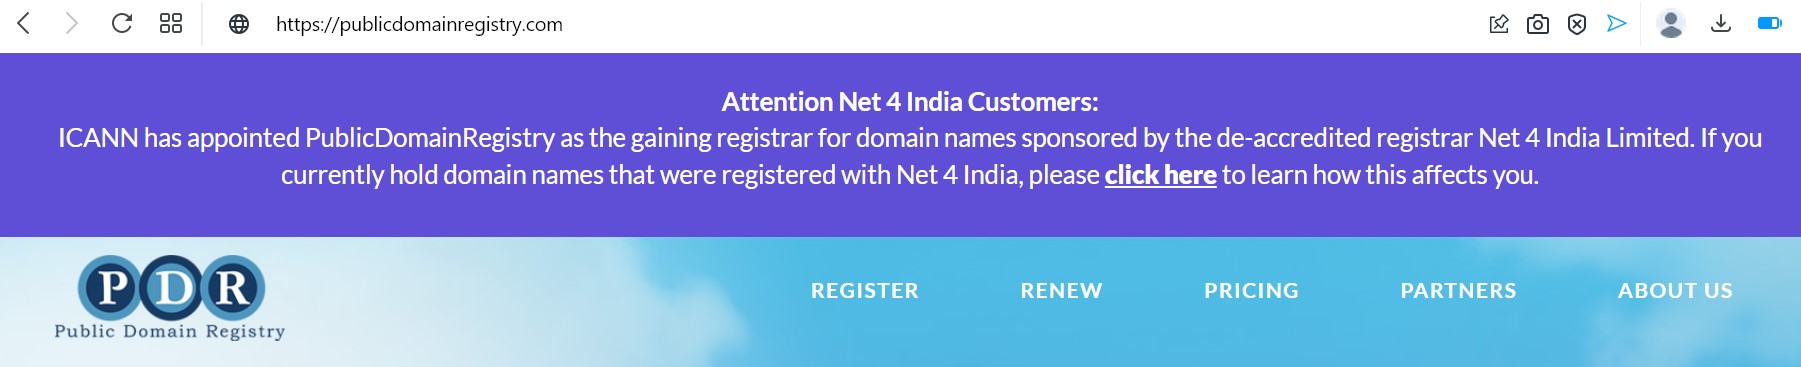 Net4India-to-PDR.jpg